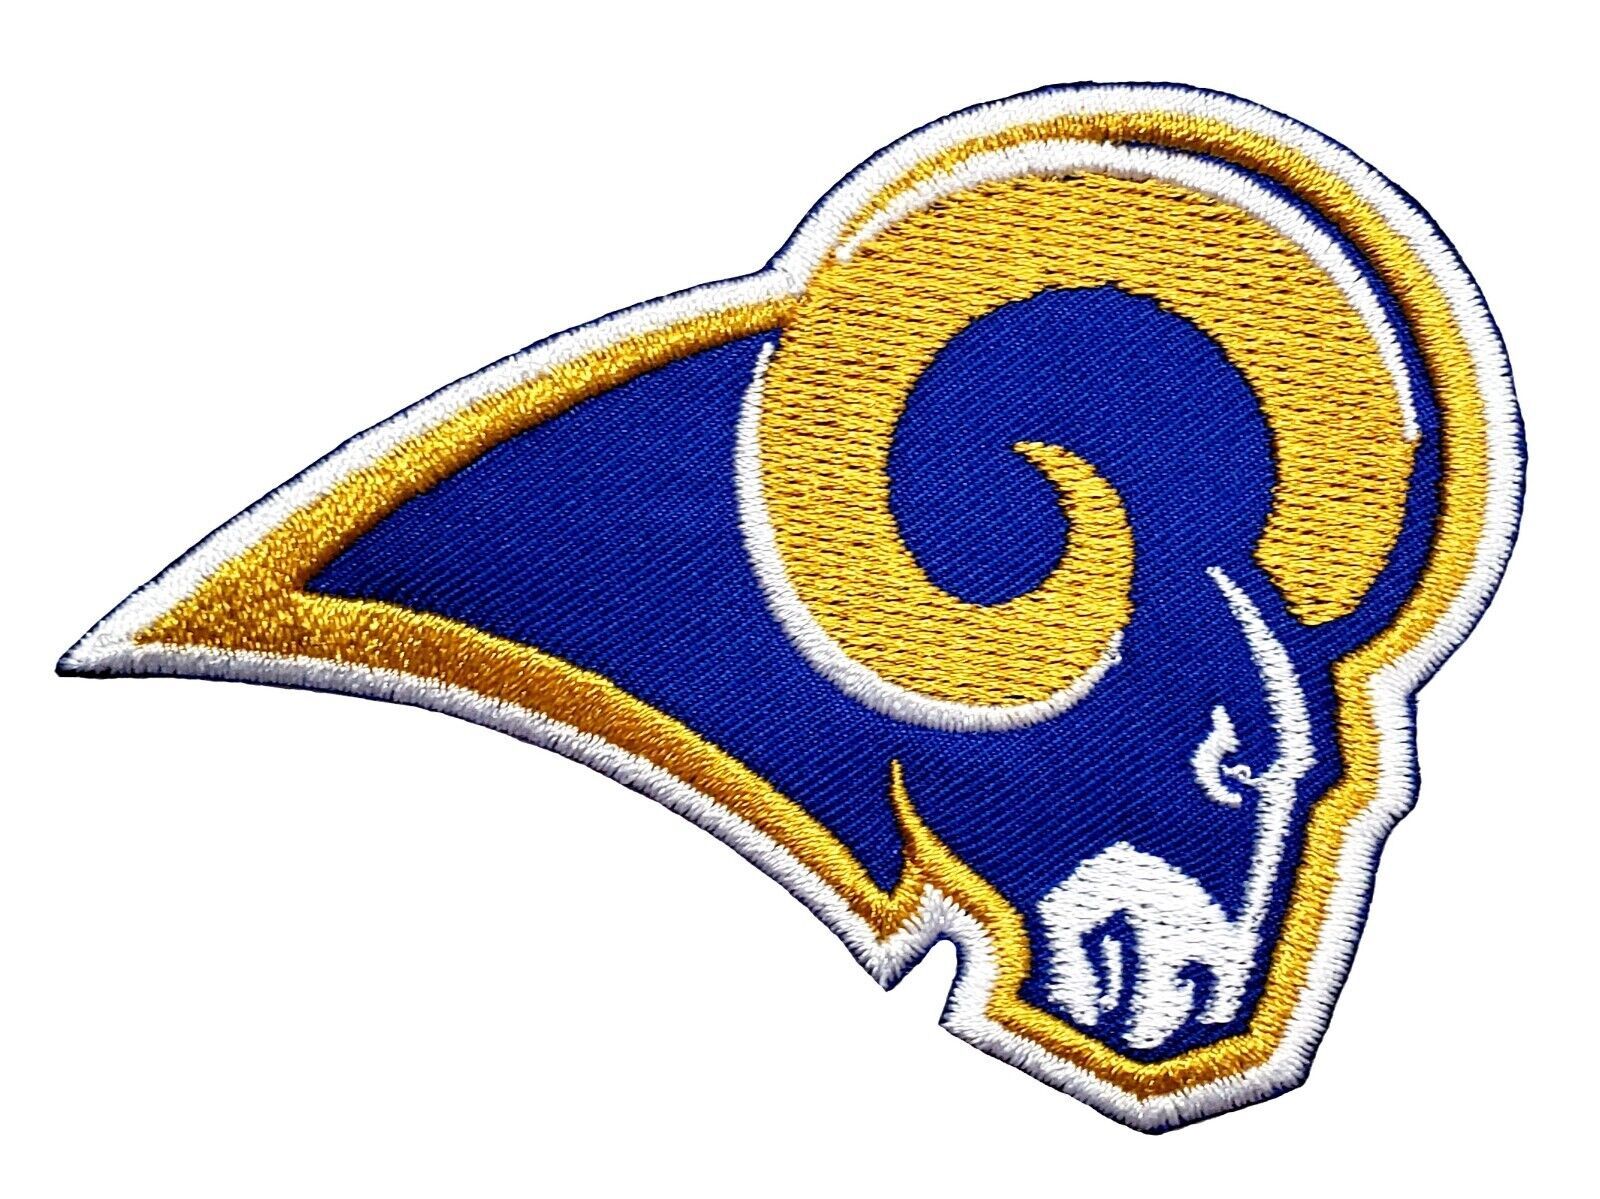 Primary image for Los Angeles Rams NFL Football Embroidered Iron On Patch 4.75" x 3.25" Gold